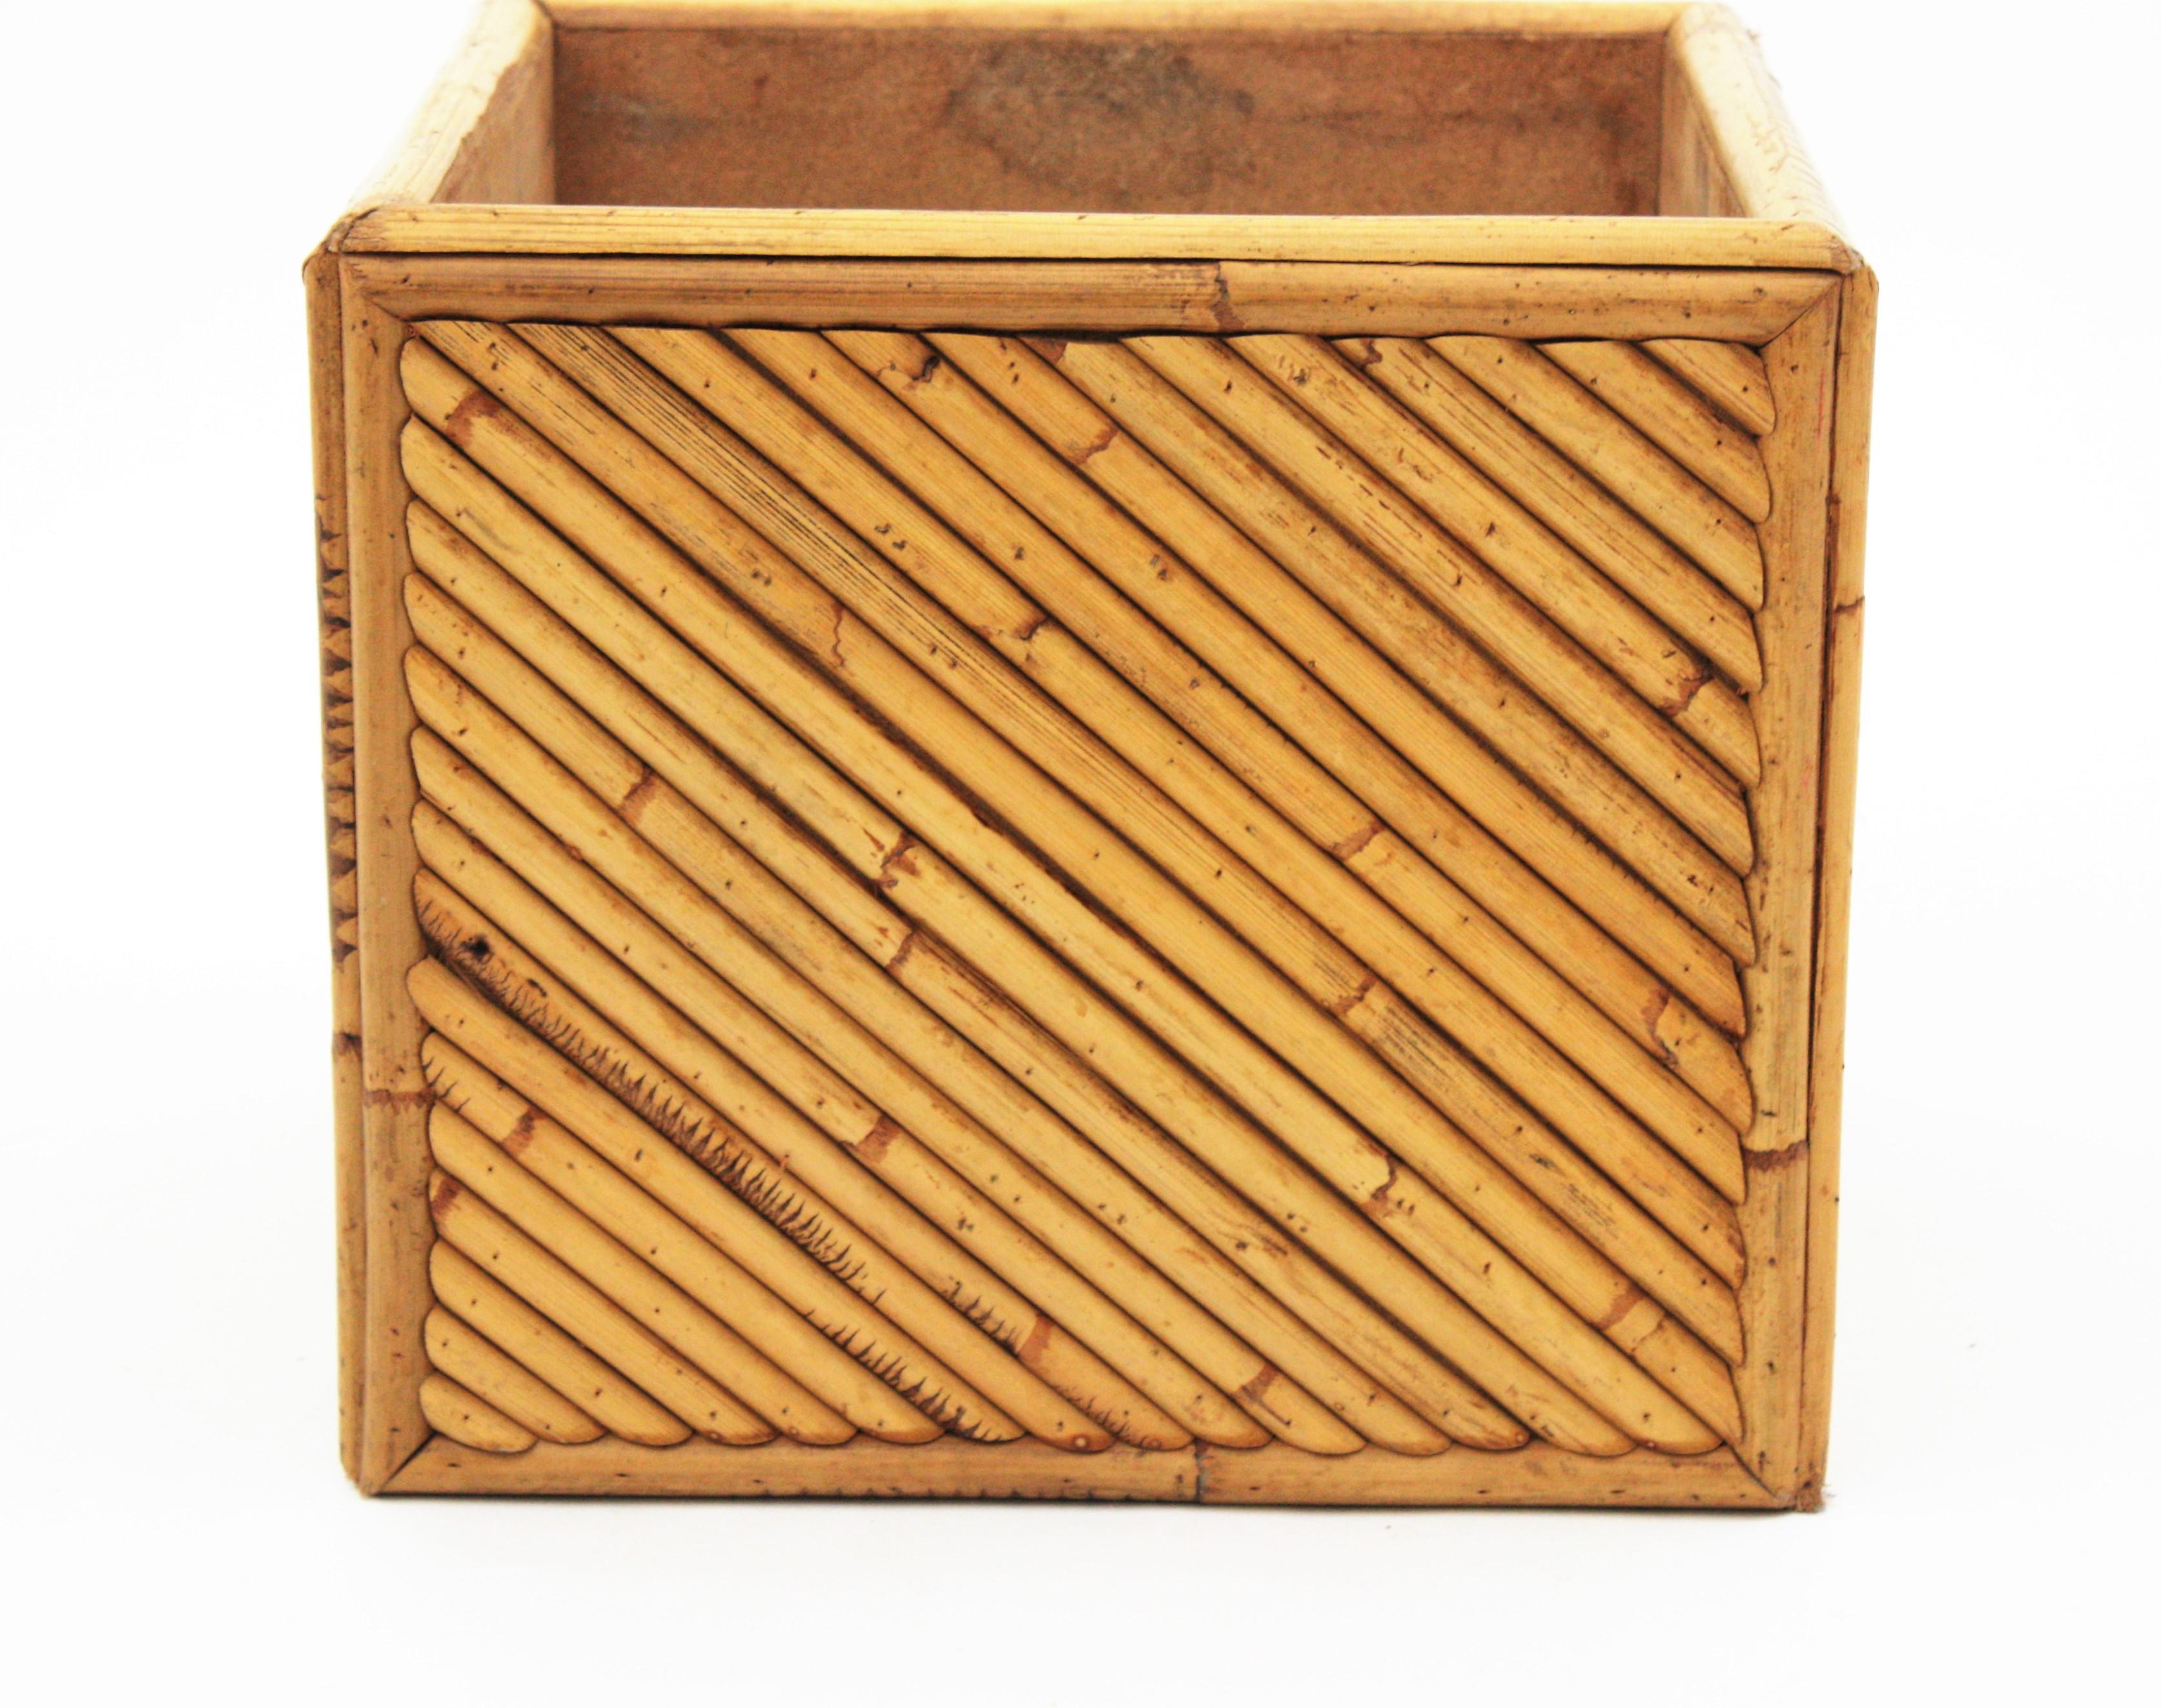 Split Reed Rattan Bamboo Gabriella Crespi Style Planter, 1970s In Good Condition For Sale In Barcelona, ES